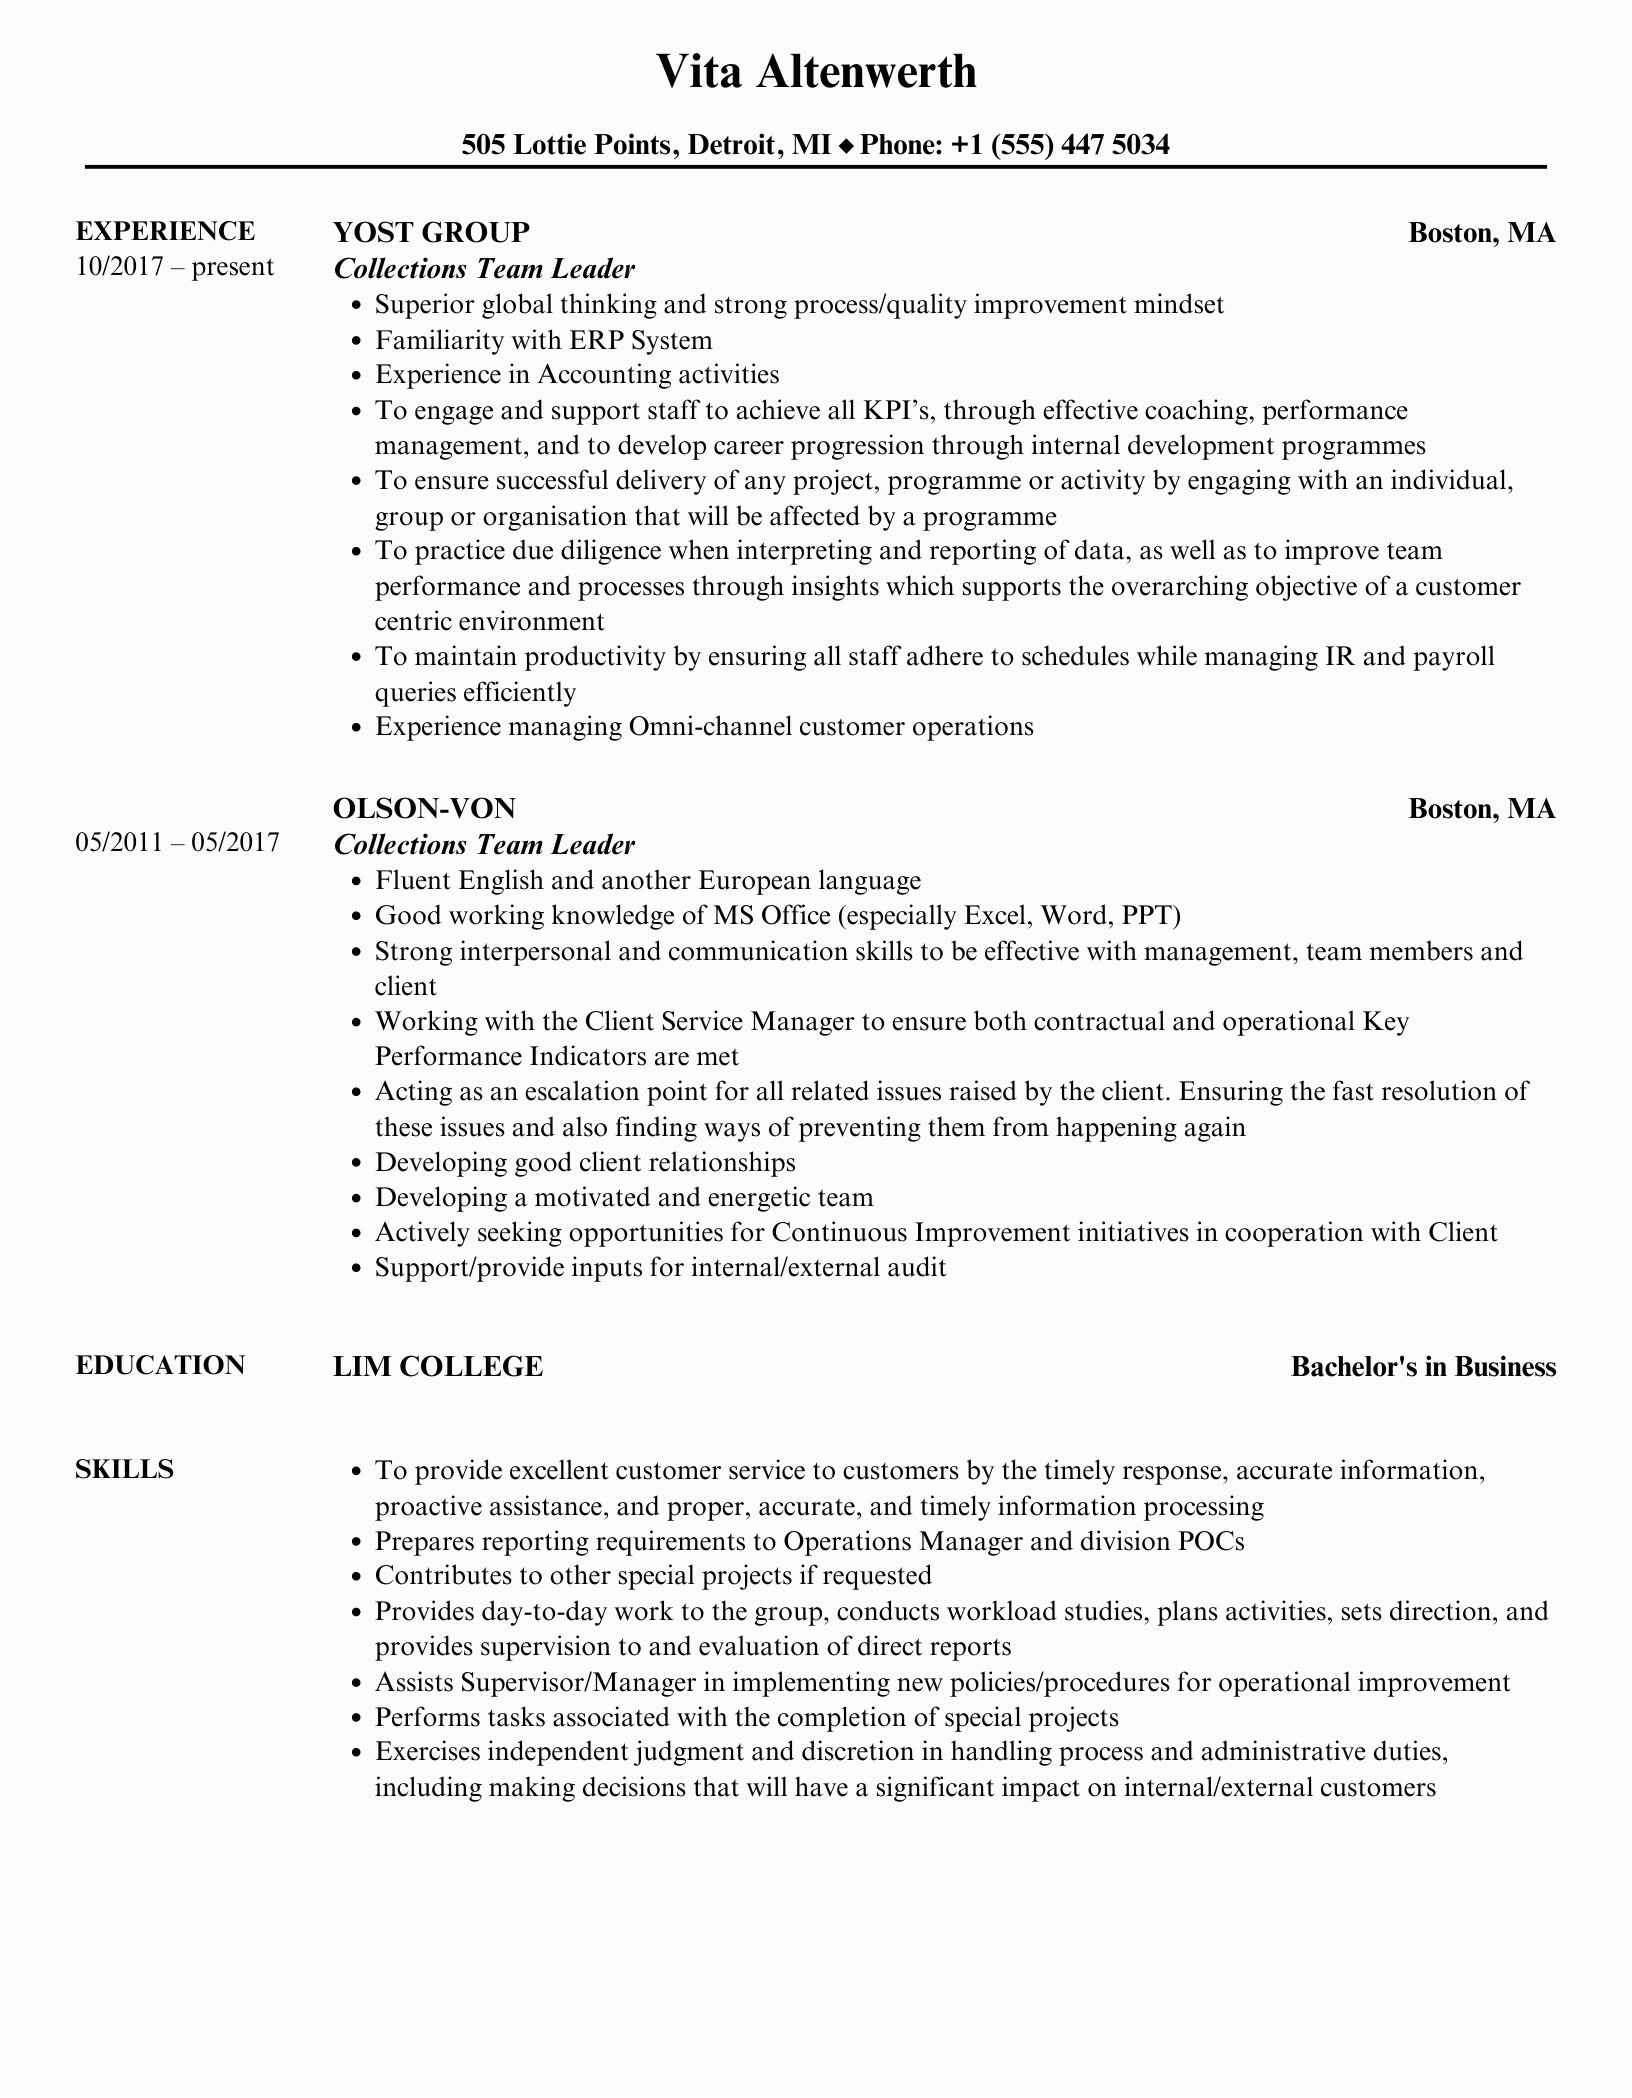 Sample Resume for Collections Team Leader Collections Team Leader Resume Samples